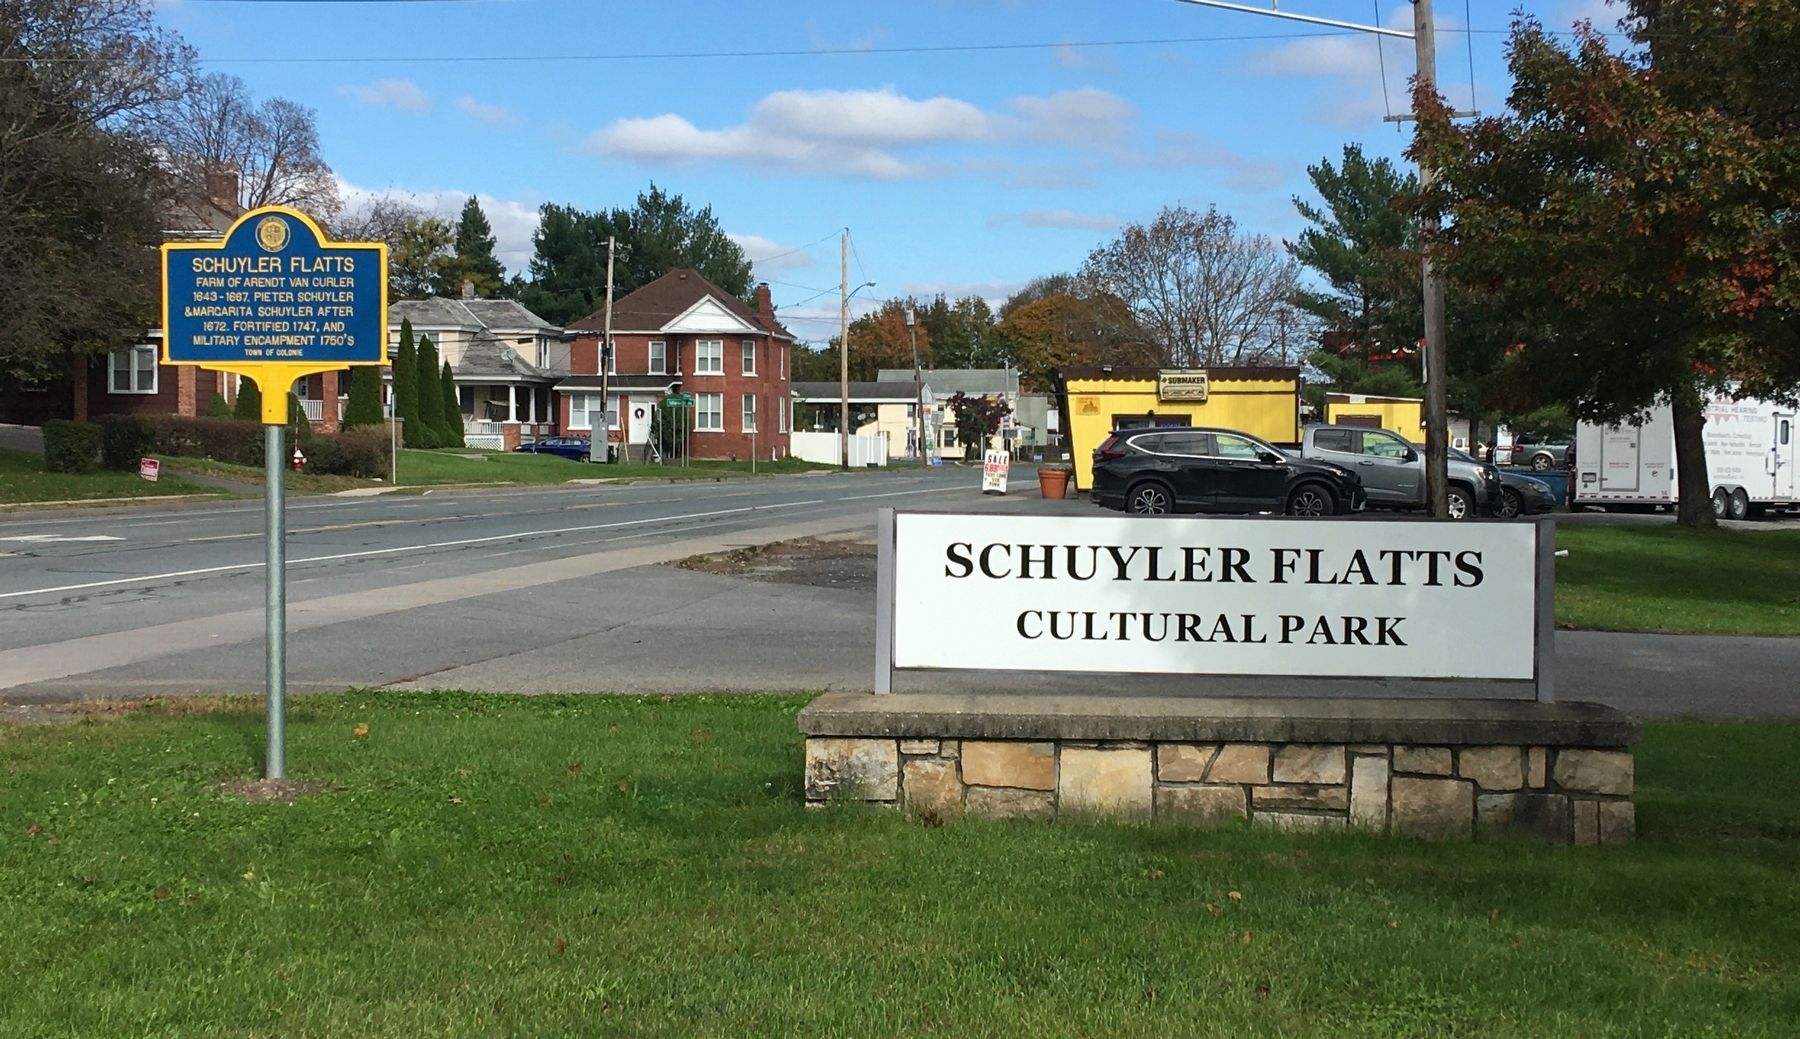 Schuyler Flatts Marker at the Entrance to Schuyler Flatts Cultural Park image. Click for full size.